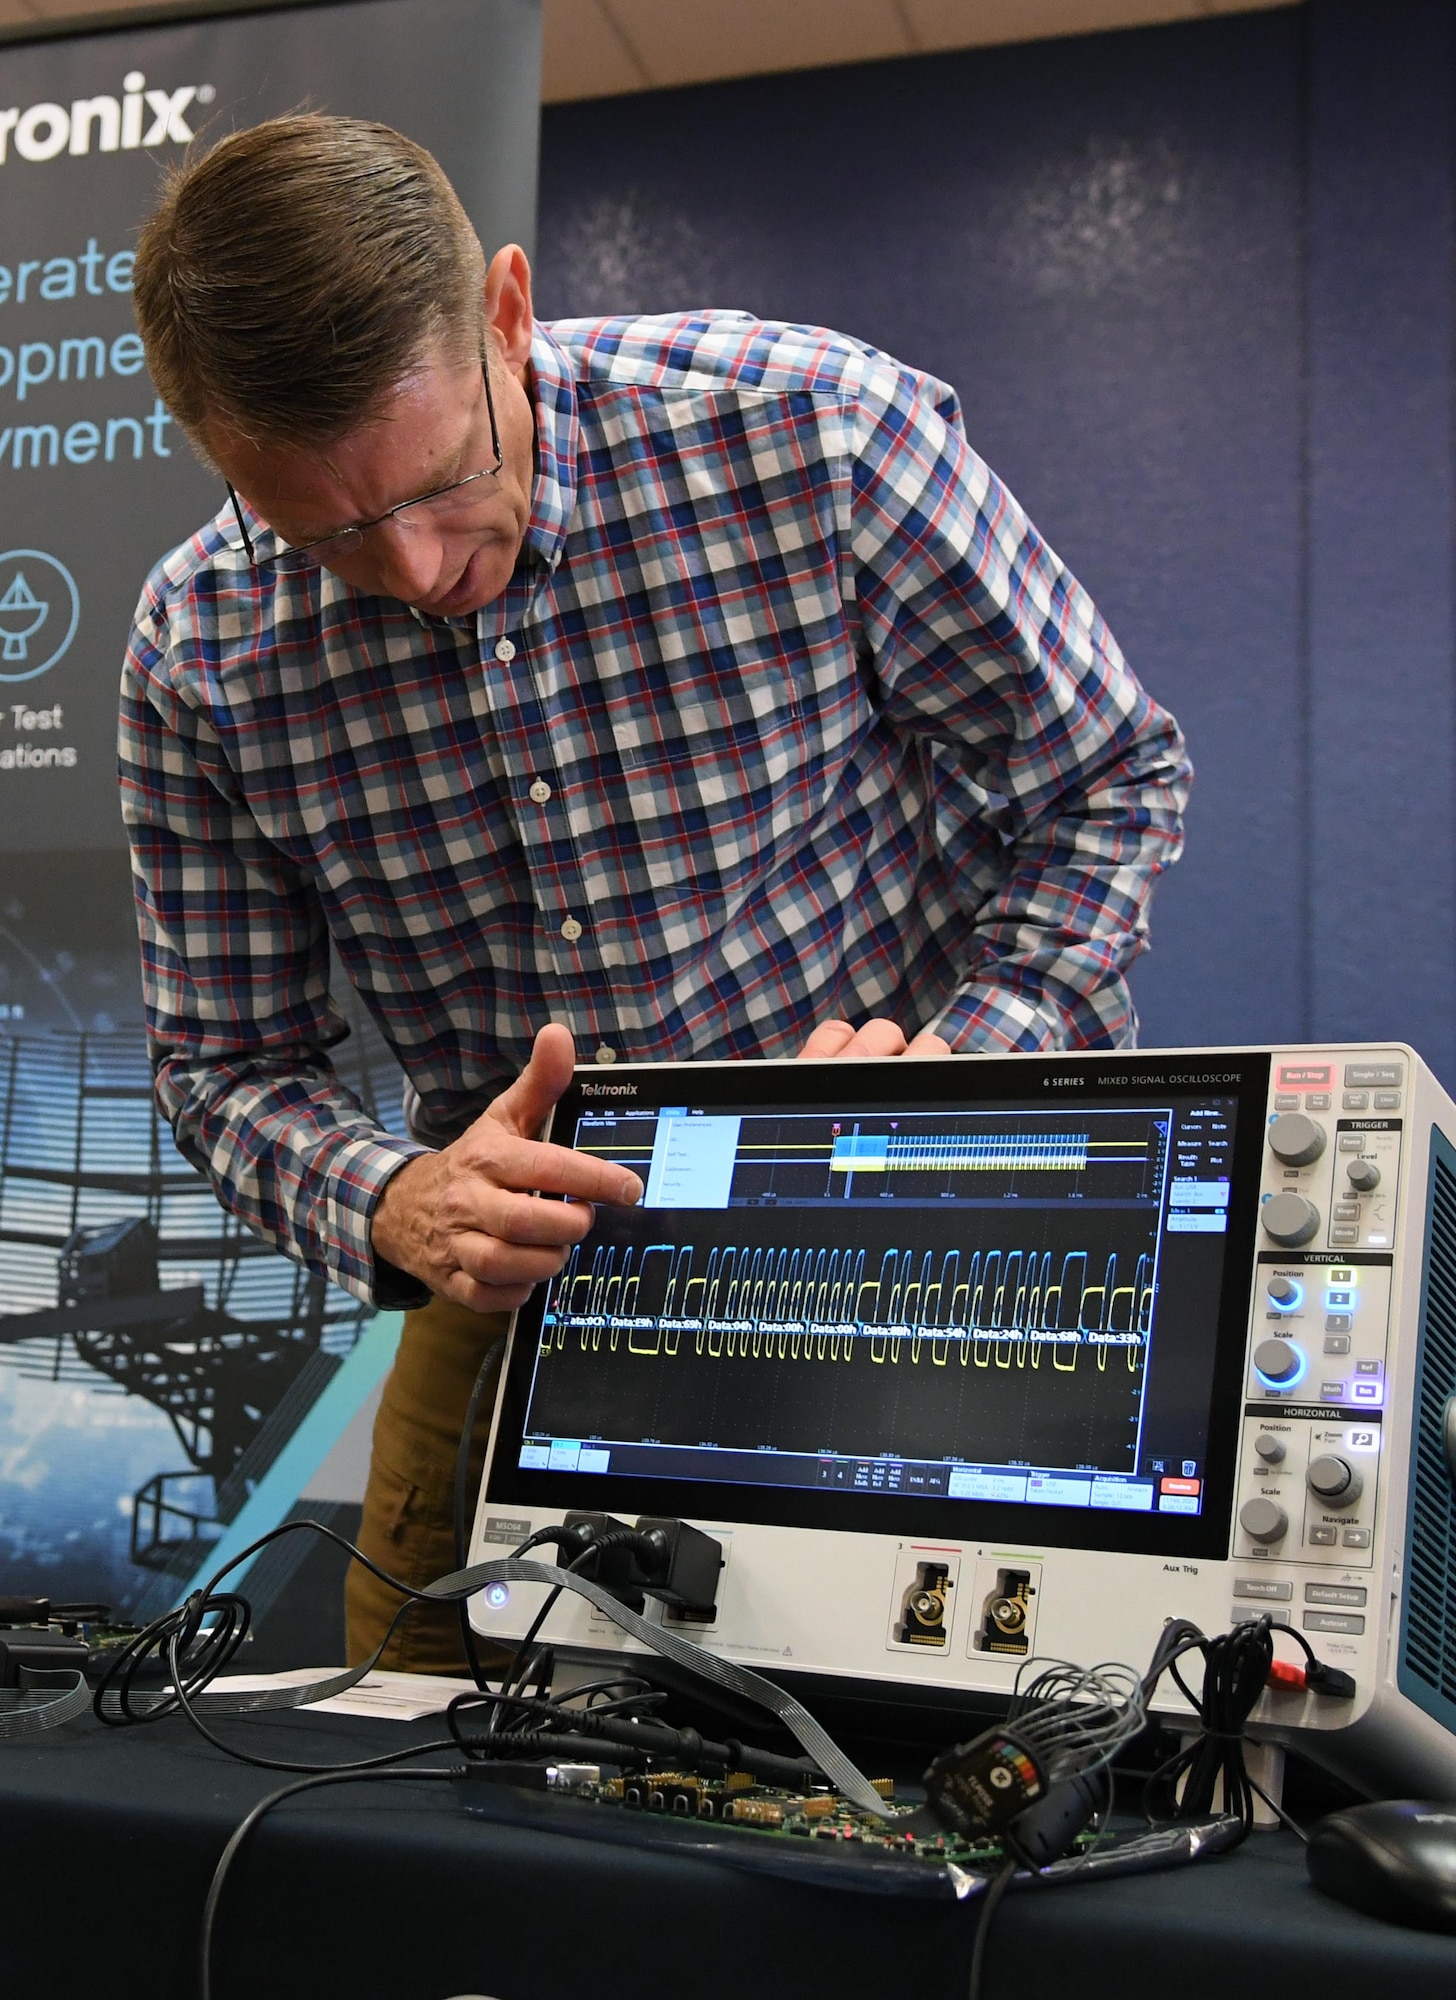 Larry Shemetulskis, Tektronix southeast U.S. channel manager, briefs on the operations of an oscilloscope used for analyzing electromagnetic signals during the Annual Keesler Air Force Base Tech Expo inside the Bay Breeze Event Center at Keesler Air Force Base, Mississippi, Feb. 11, 2020. The expo, hosted by the 81st Communications Squadron, was held to introduce military members to the latest in technological advancements to bolster the Air Force�s capabilities in national defense. (U.S. Air Force photo by Kemberly Groue)